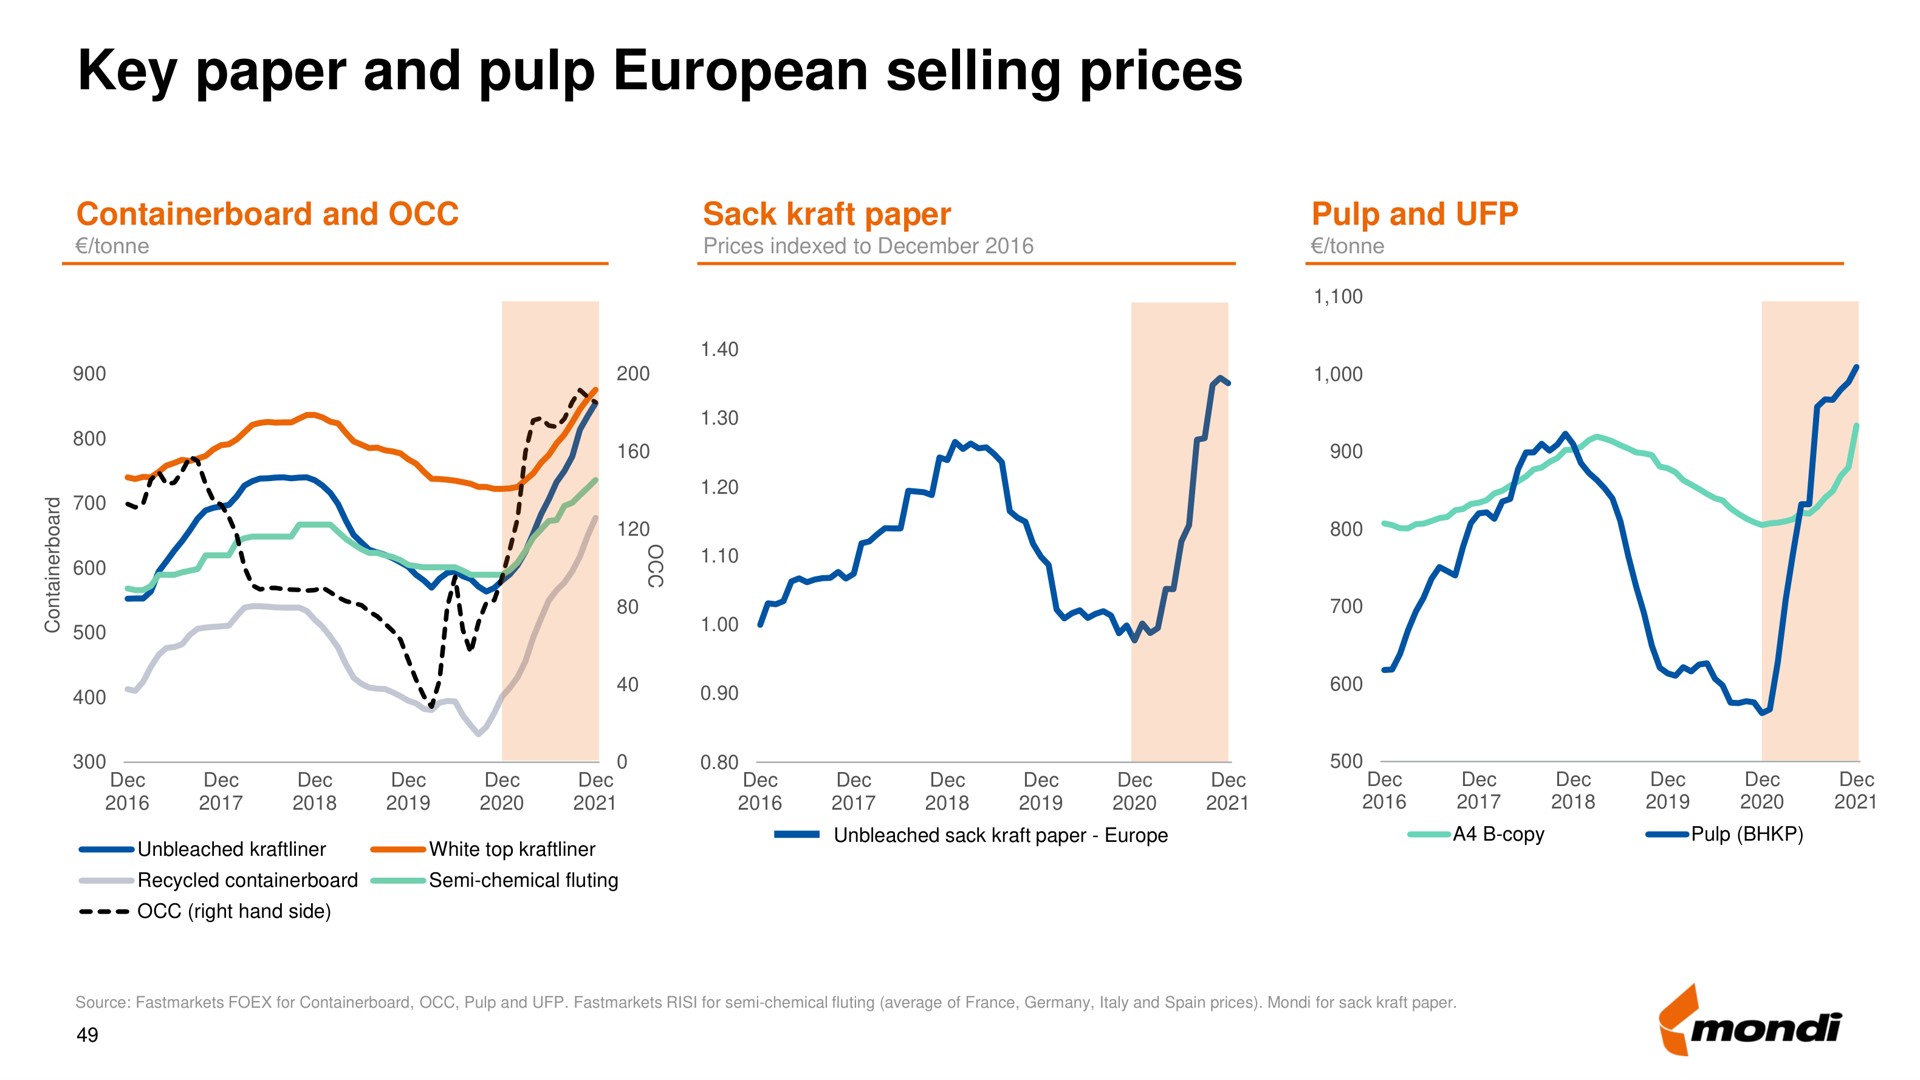 key paper and pulp selling prices | Mondi